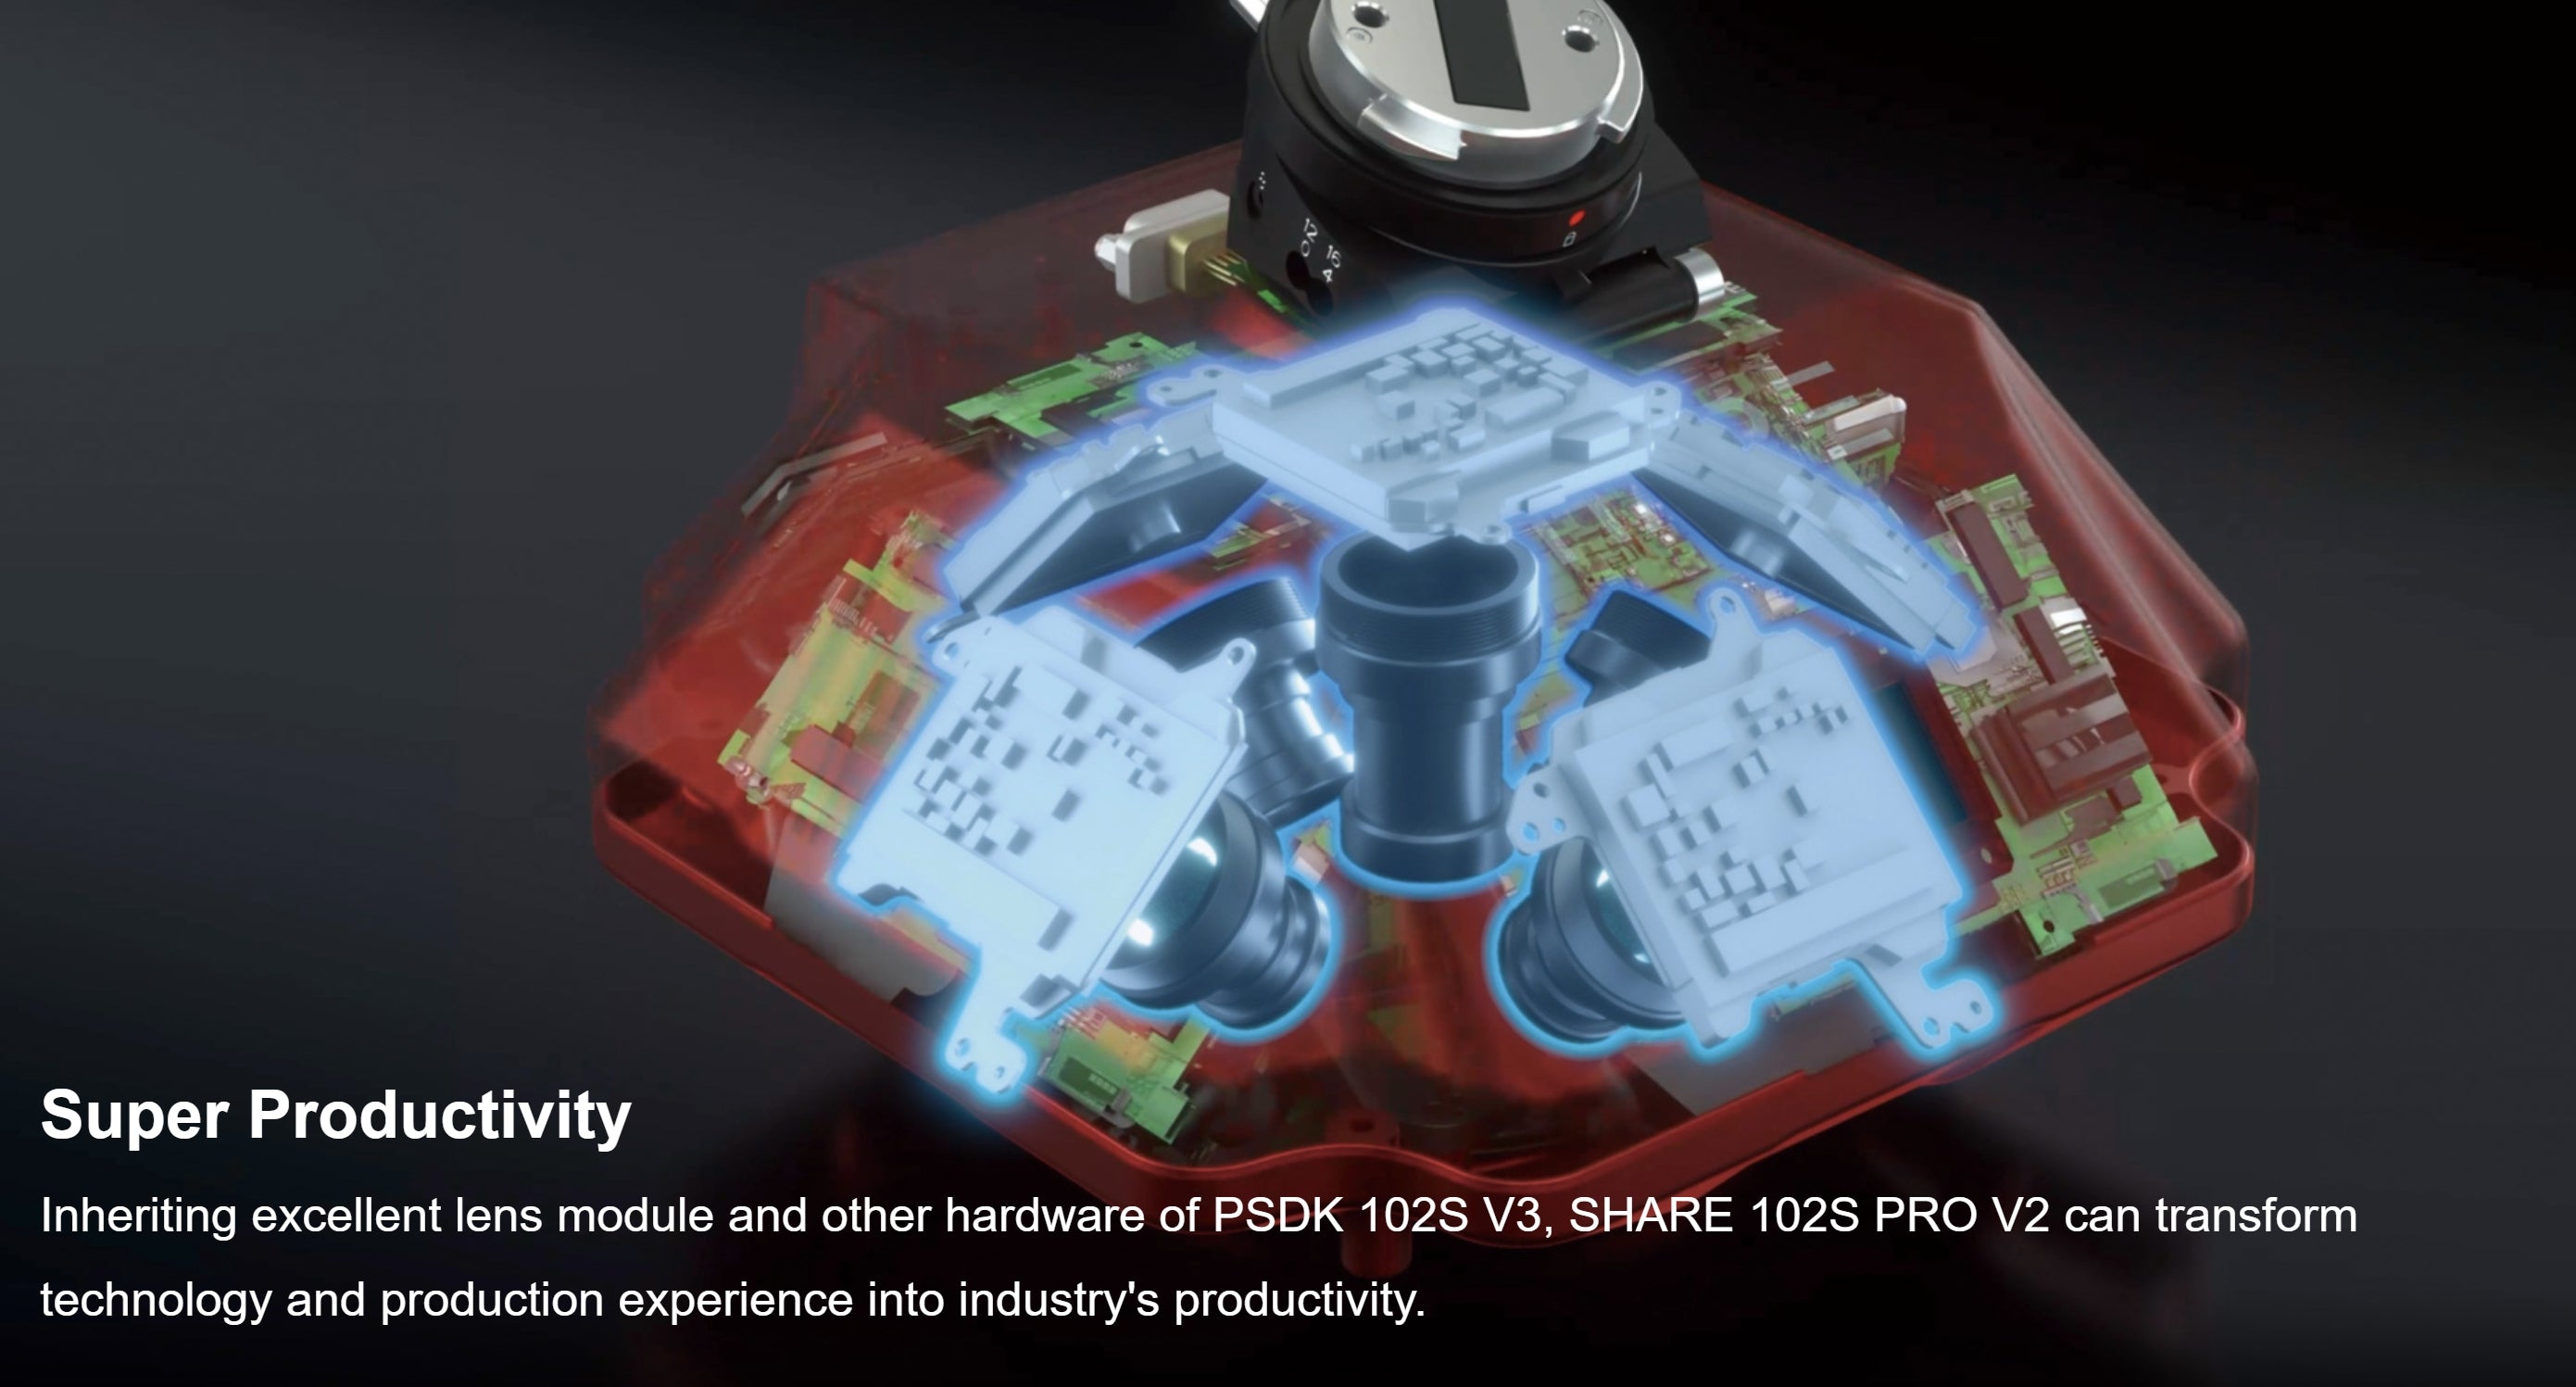 SHARE 102S Pro V2 enhances technology and manufacturing expertise for industry-leading productivity.